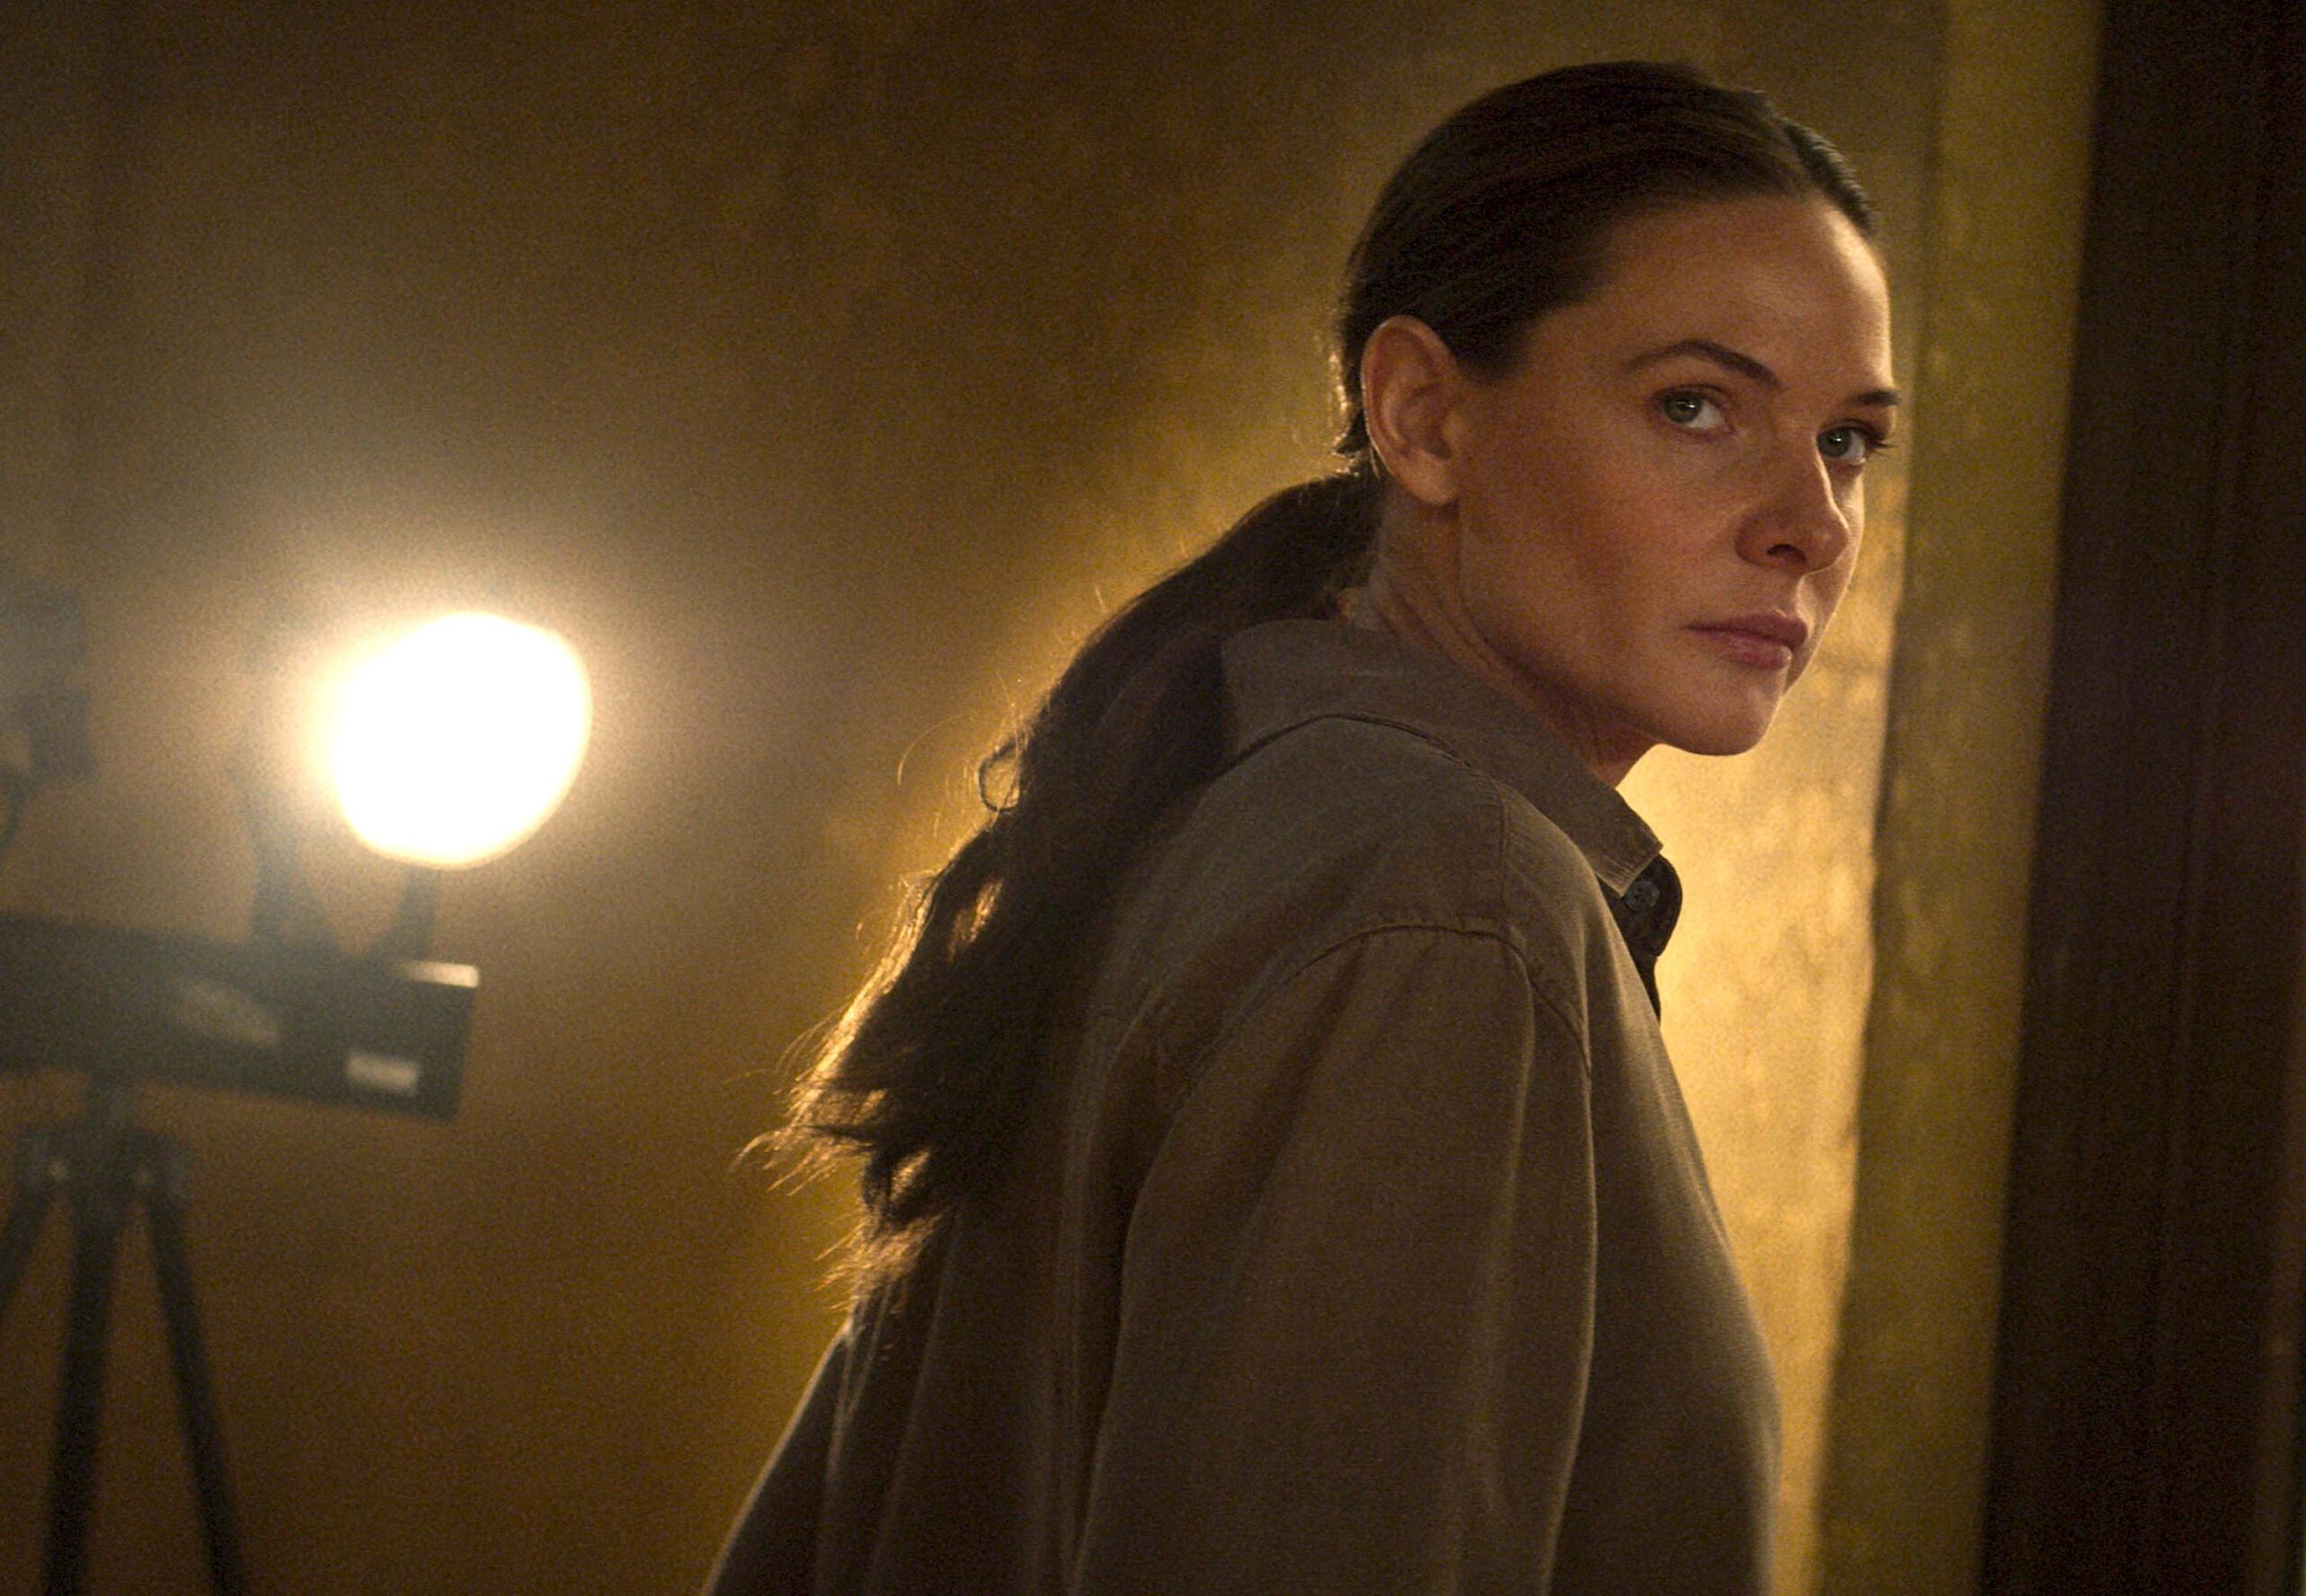 Rebecca Ferguson as Ilsa Faust in Mission: Impossible – Dead Reckoning Part One